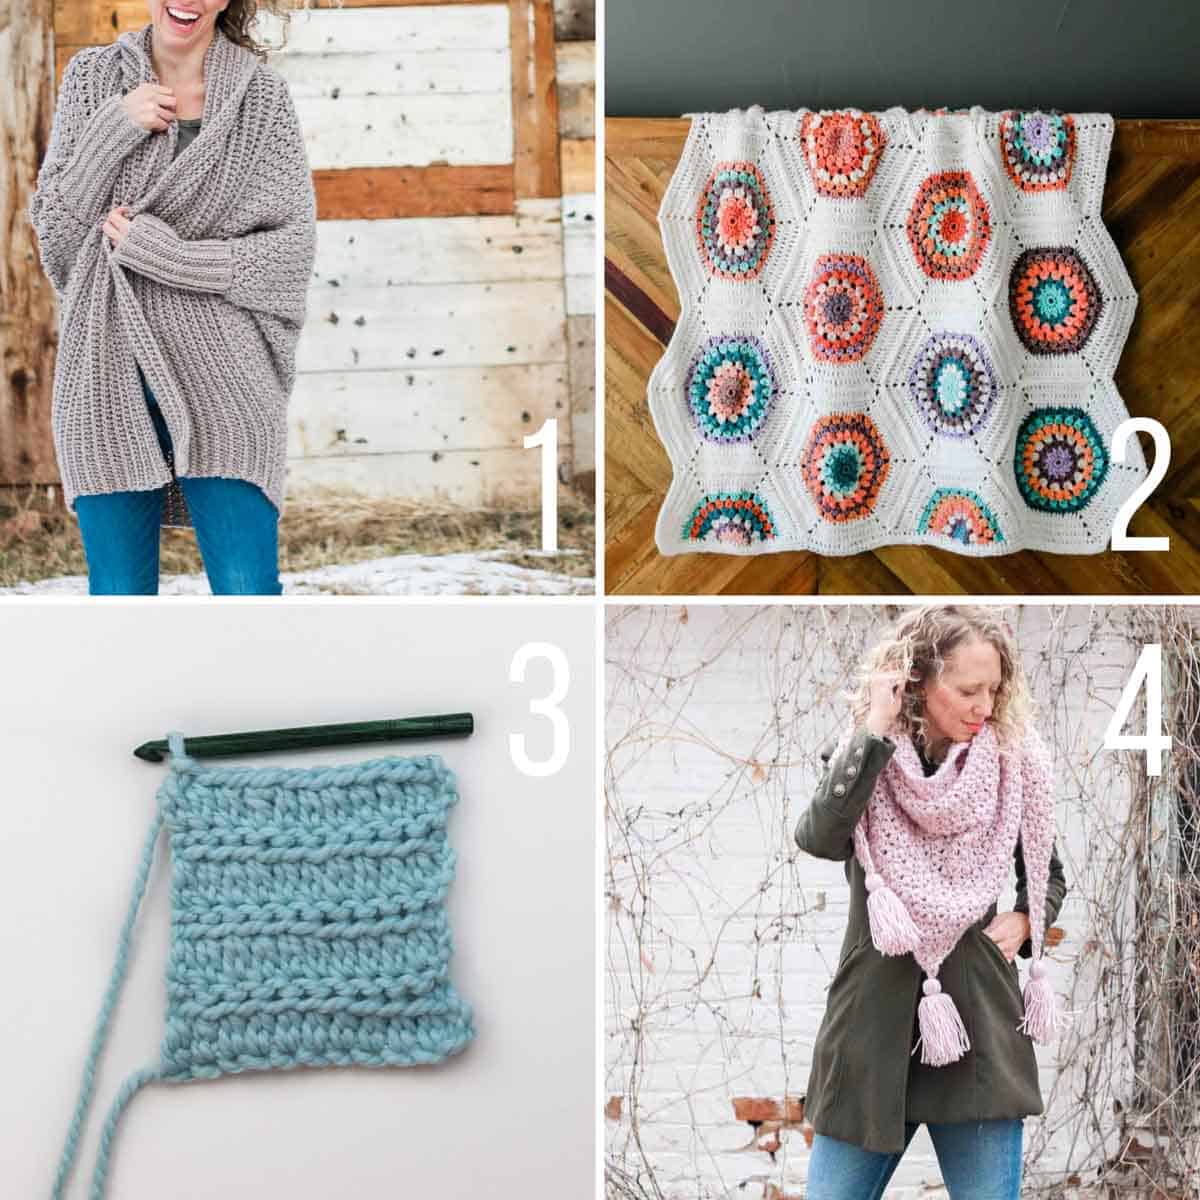 Free crochet patterns with video tutorials including a hexagon blanket, a simple cardigan and a lace shawl.